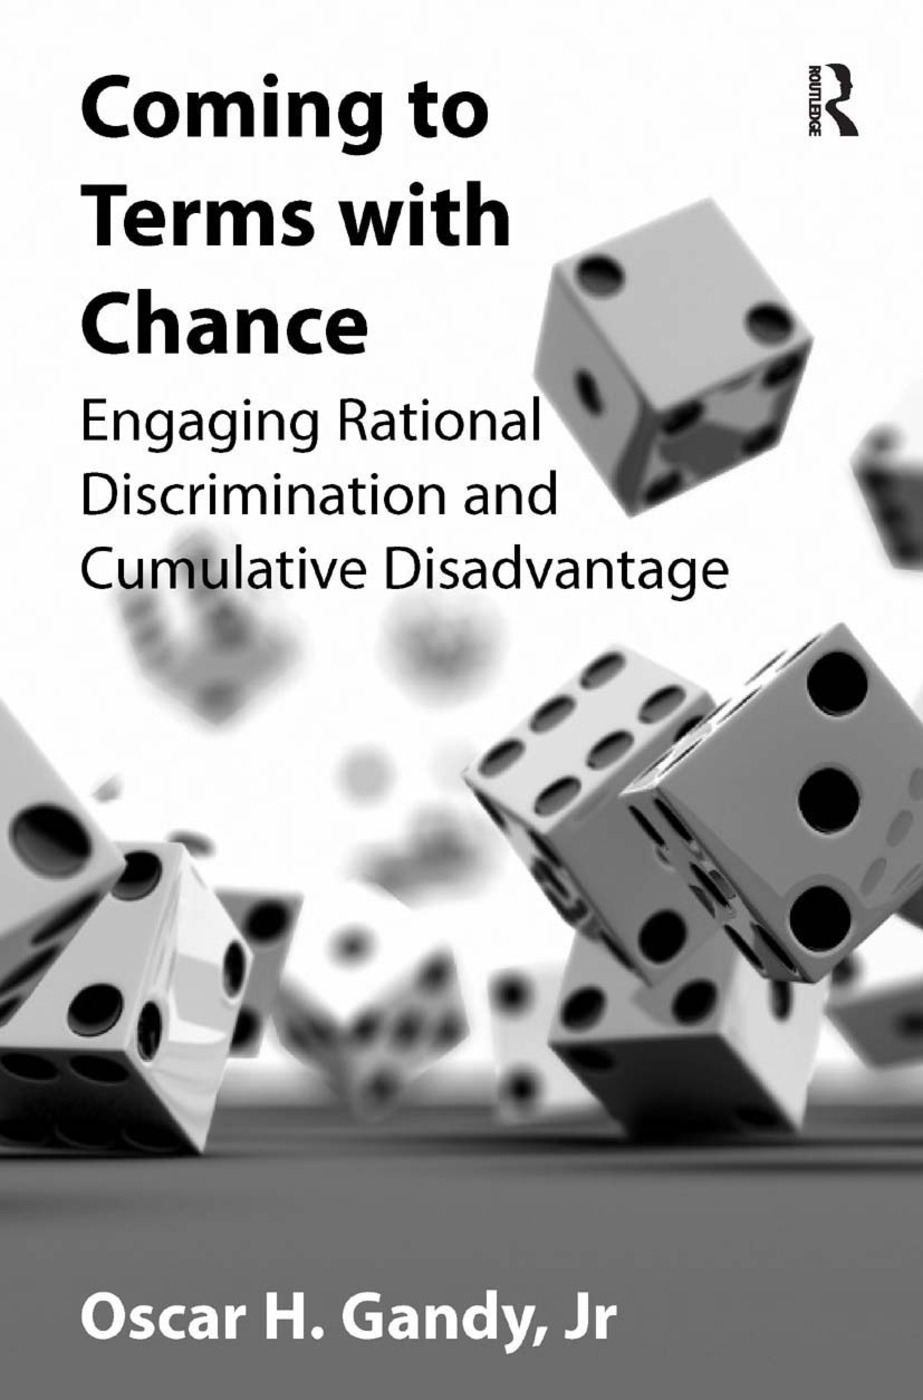 Coming to Terms with Chance: Engaging Rational Discrimination and Cumulative Disadvantage. Oscar H. Gandy, JR